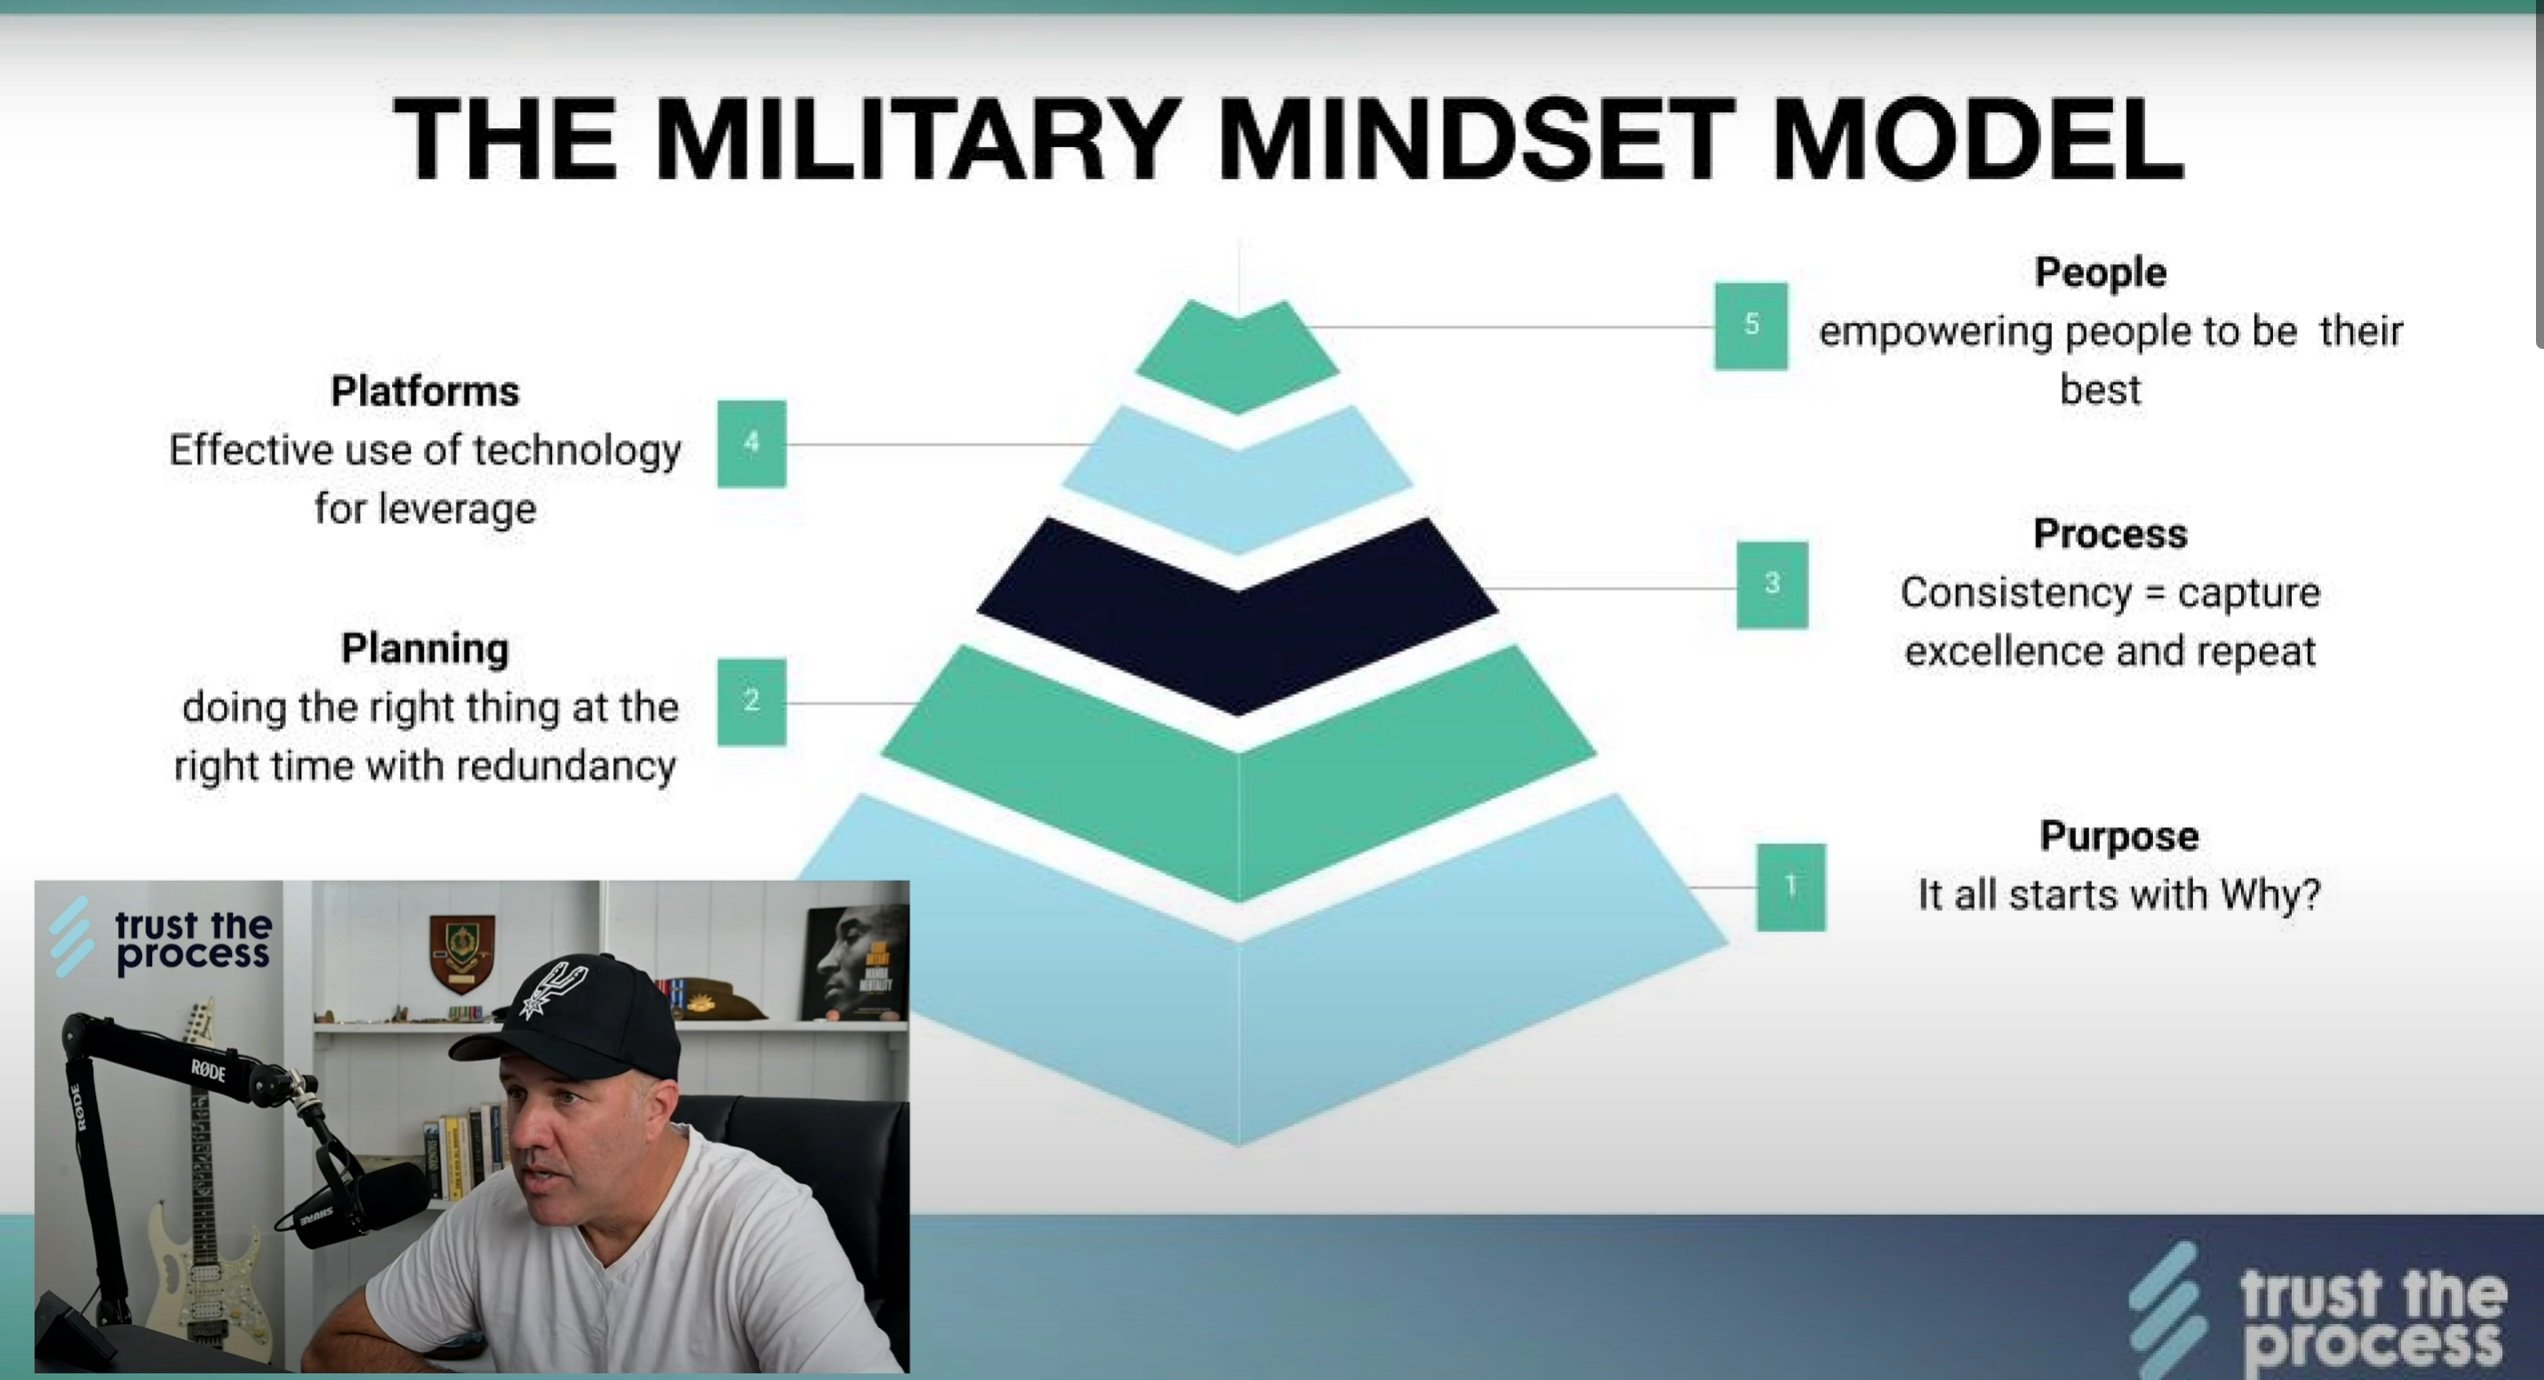 5 Pillars of the Military Mindset for Business